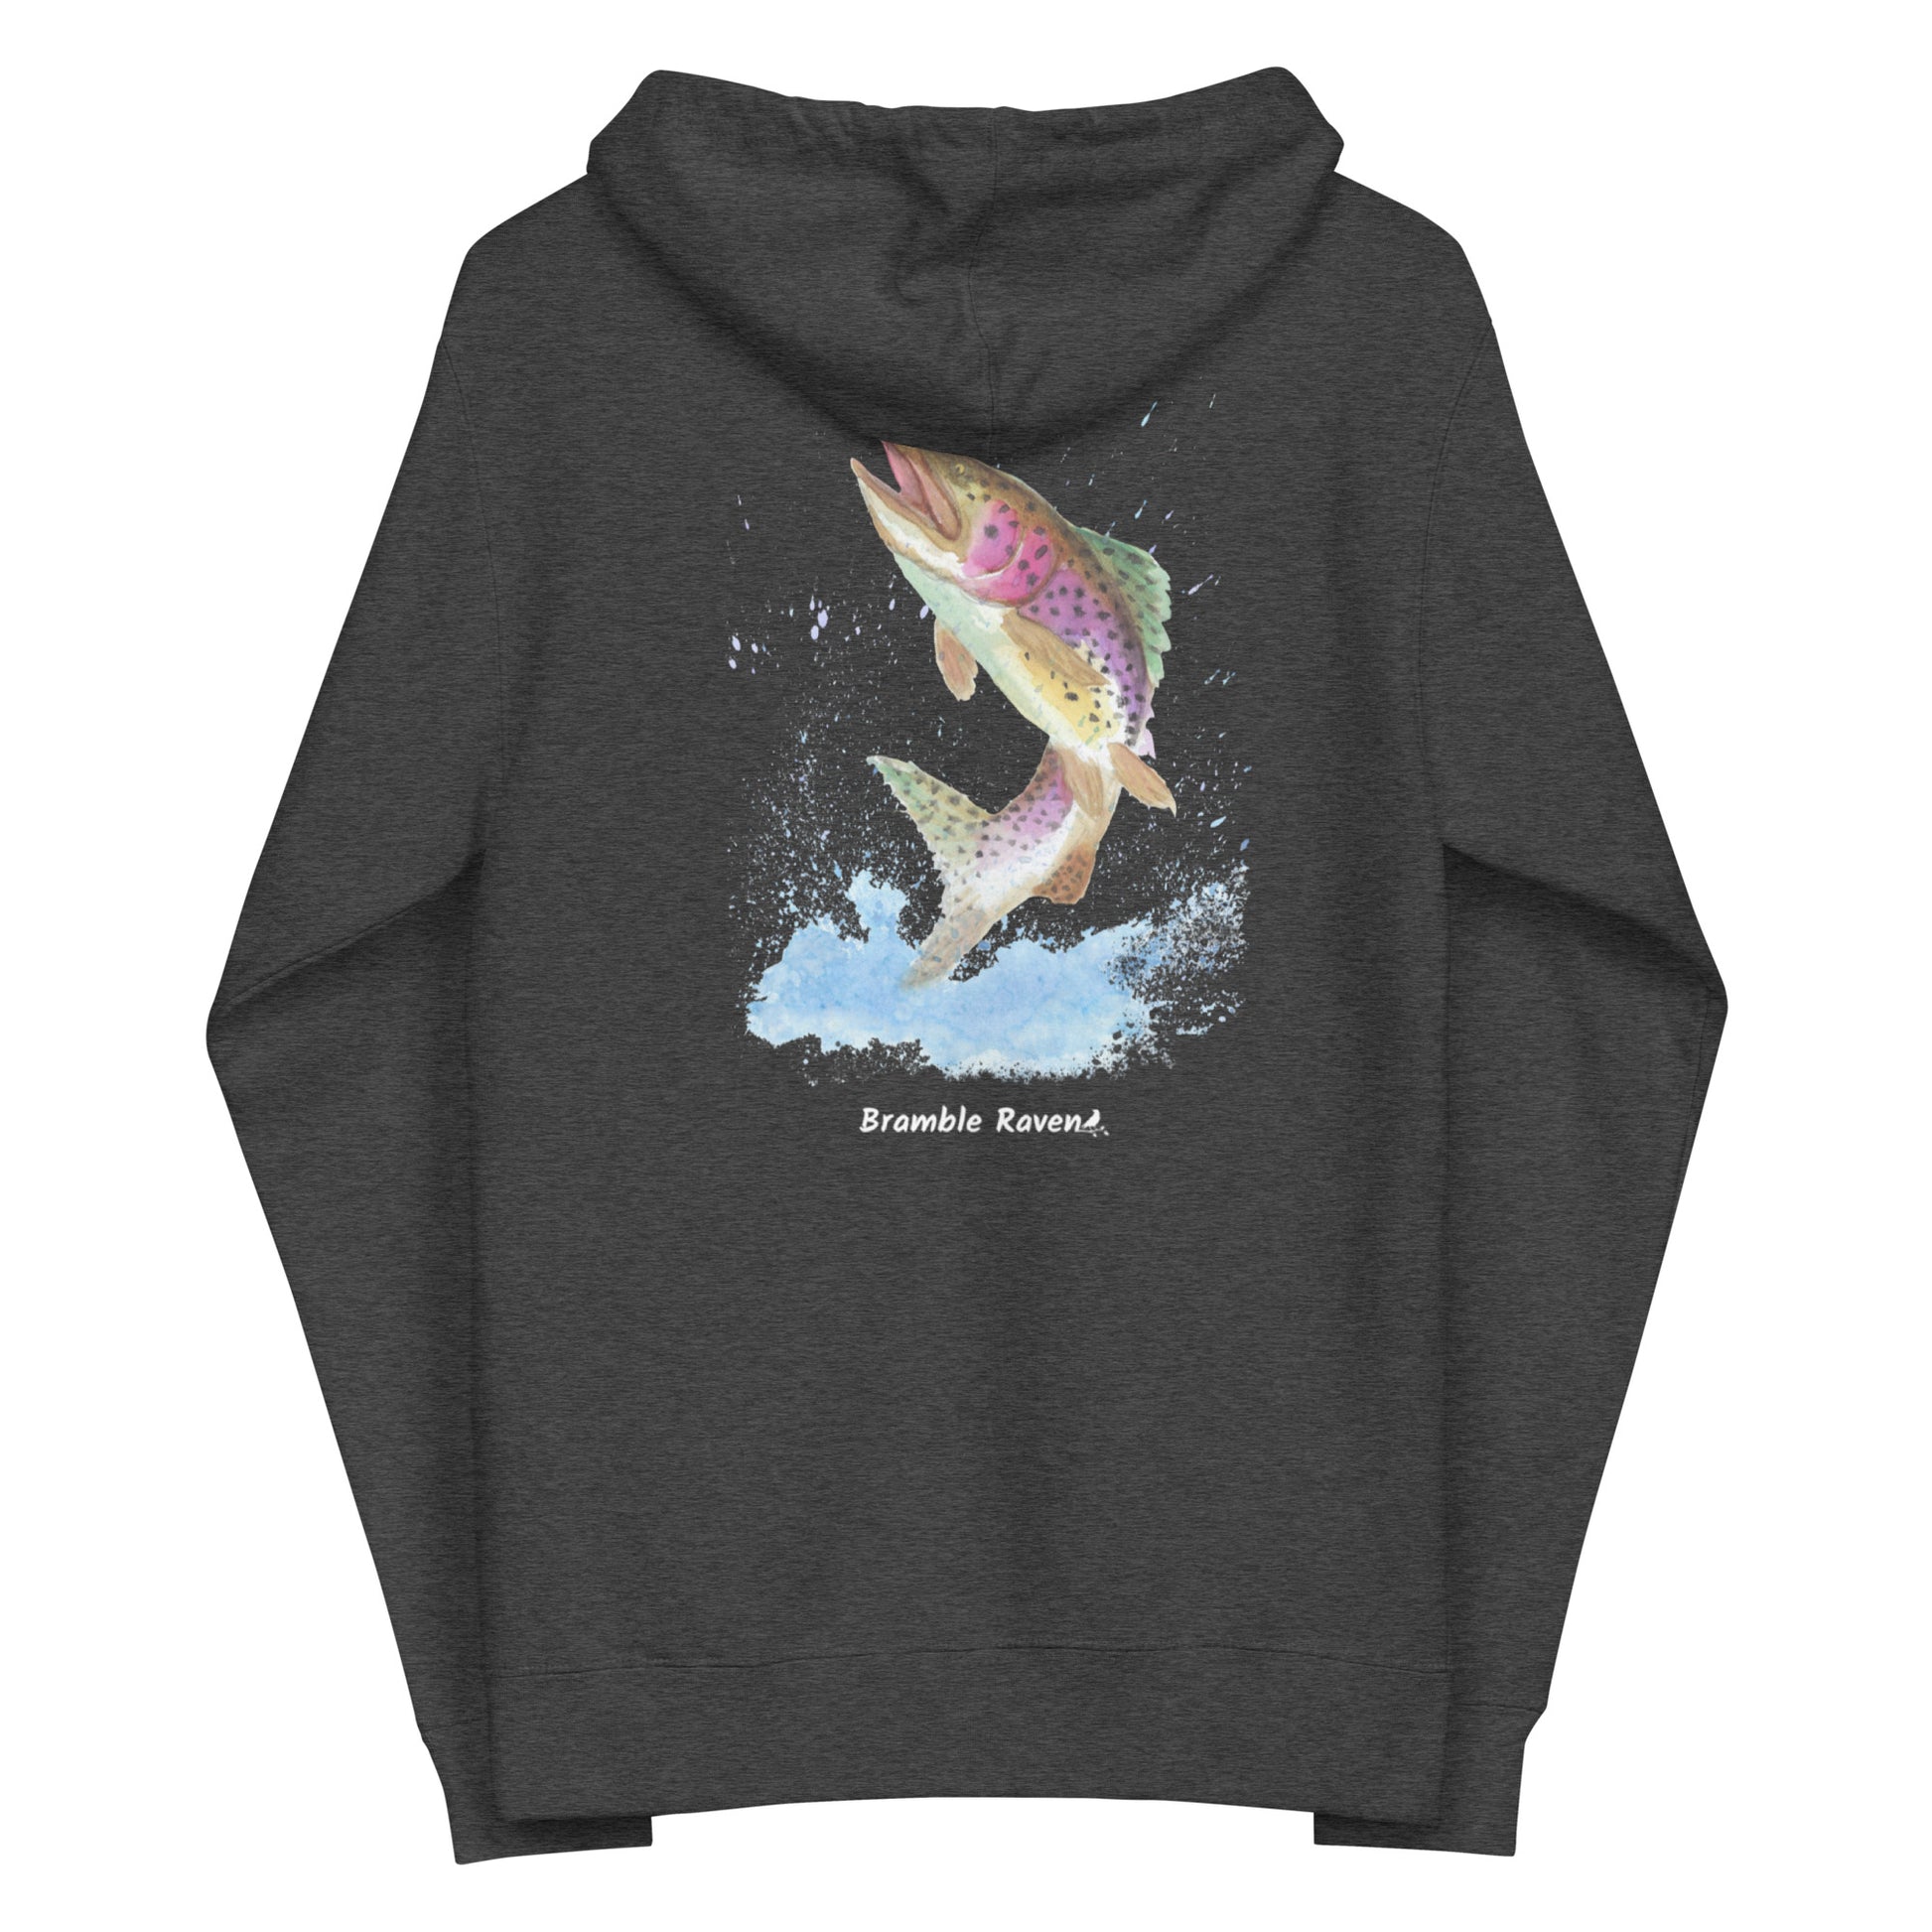 Unisex charcoal heather grey colored fleece-lined zip-up hoodie. Features original watercolor painting of a rainbow trout leaping from the water on the back of the hoodie.